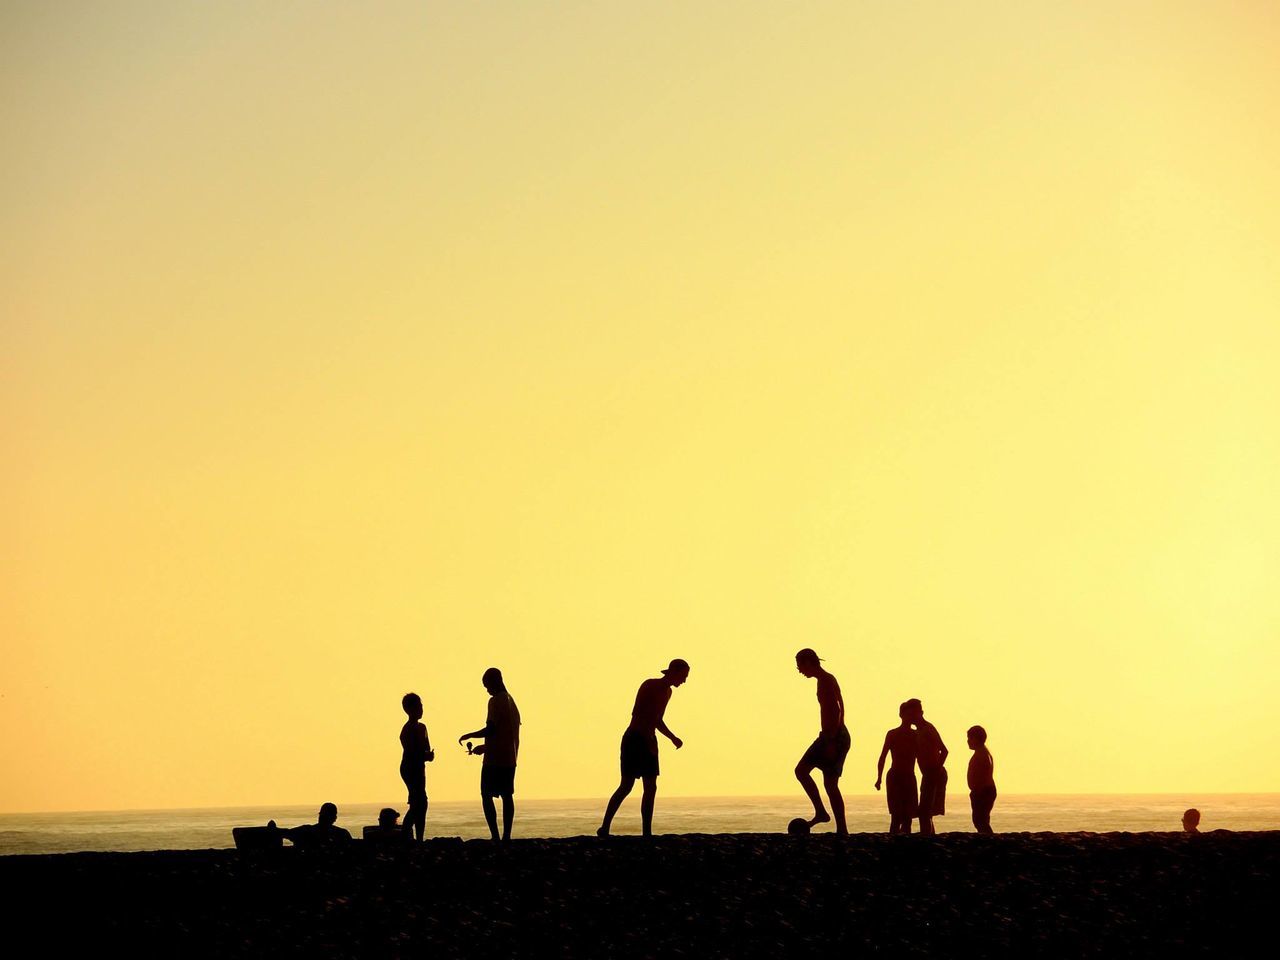 SILHOUETTE PEOPLE PLAYING SOCCER ON BEACH AGAINST CLEAR SKY